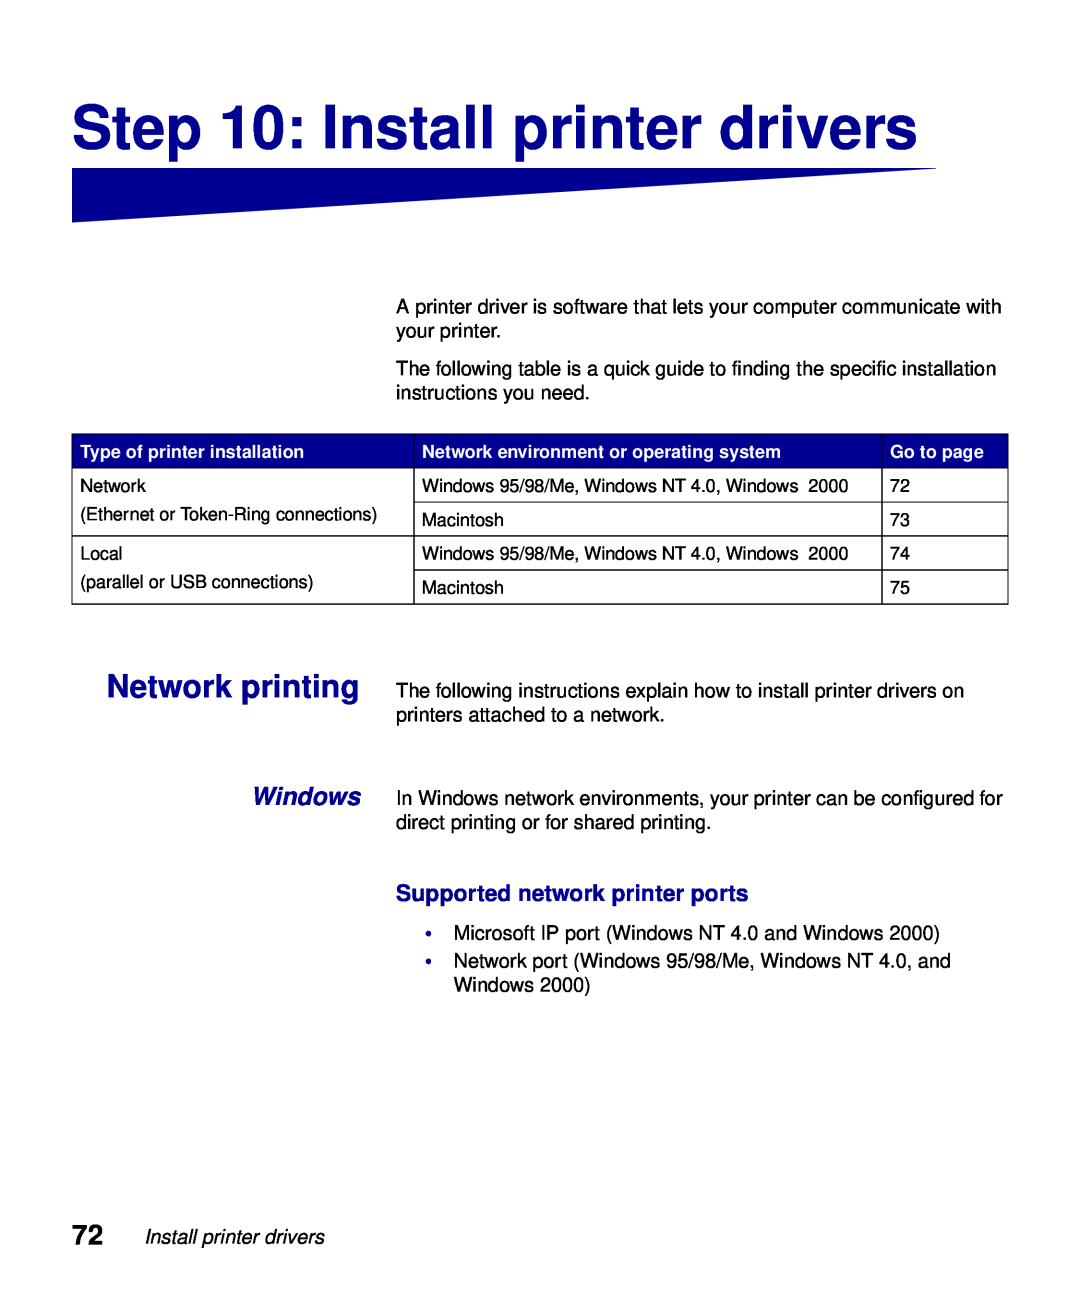 Lexmark S510-2222-00 setup guide Install printer drivers, Network printing, Windows, Supported network printer ports 